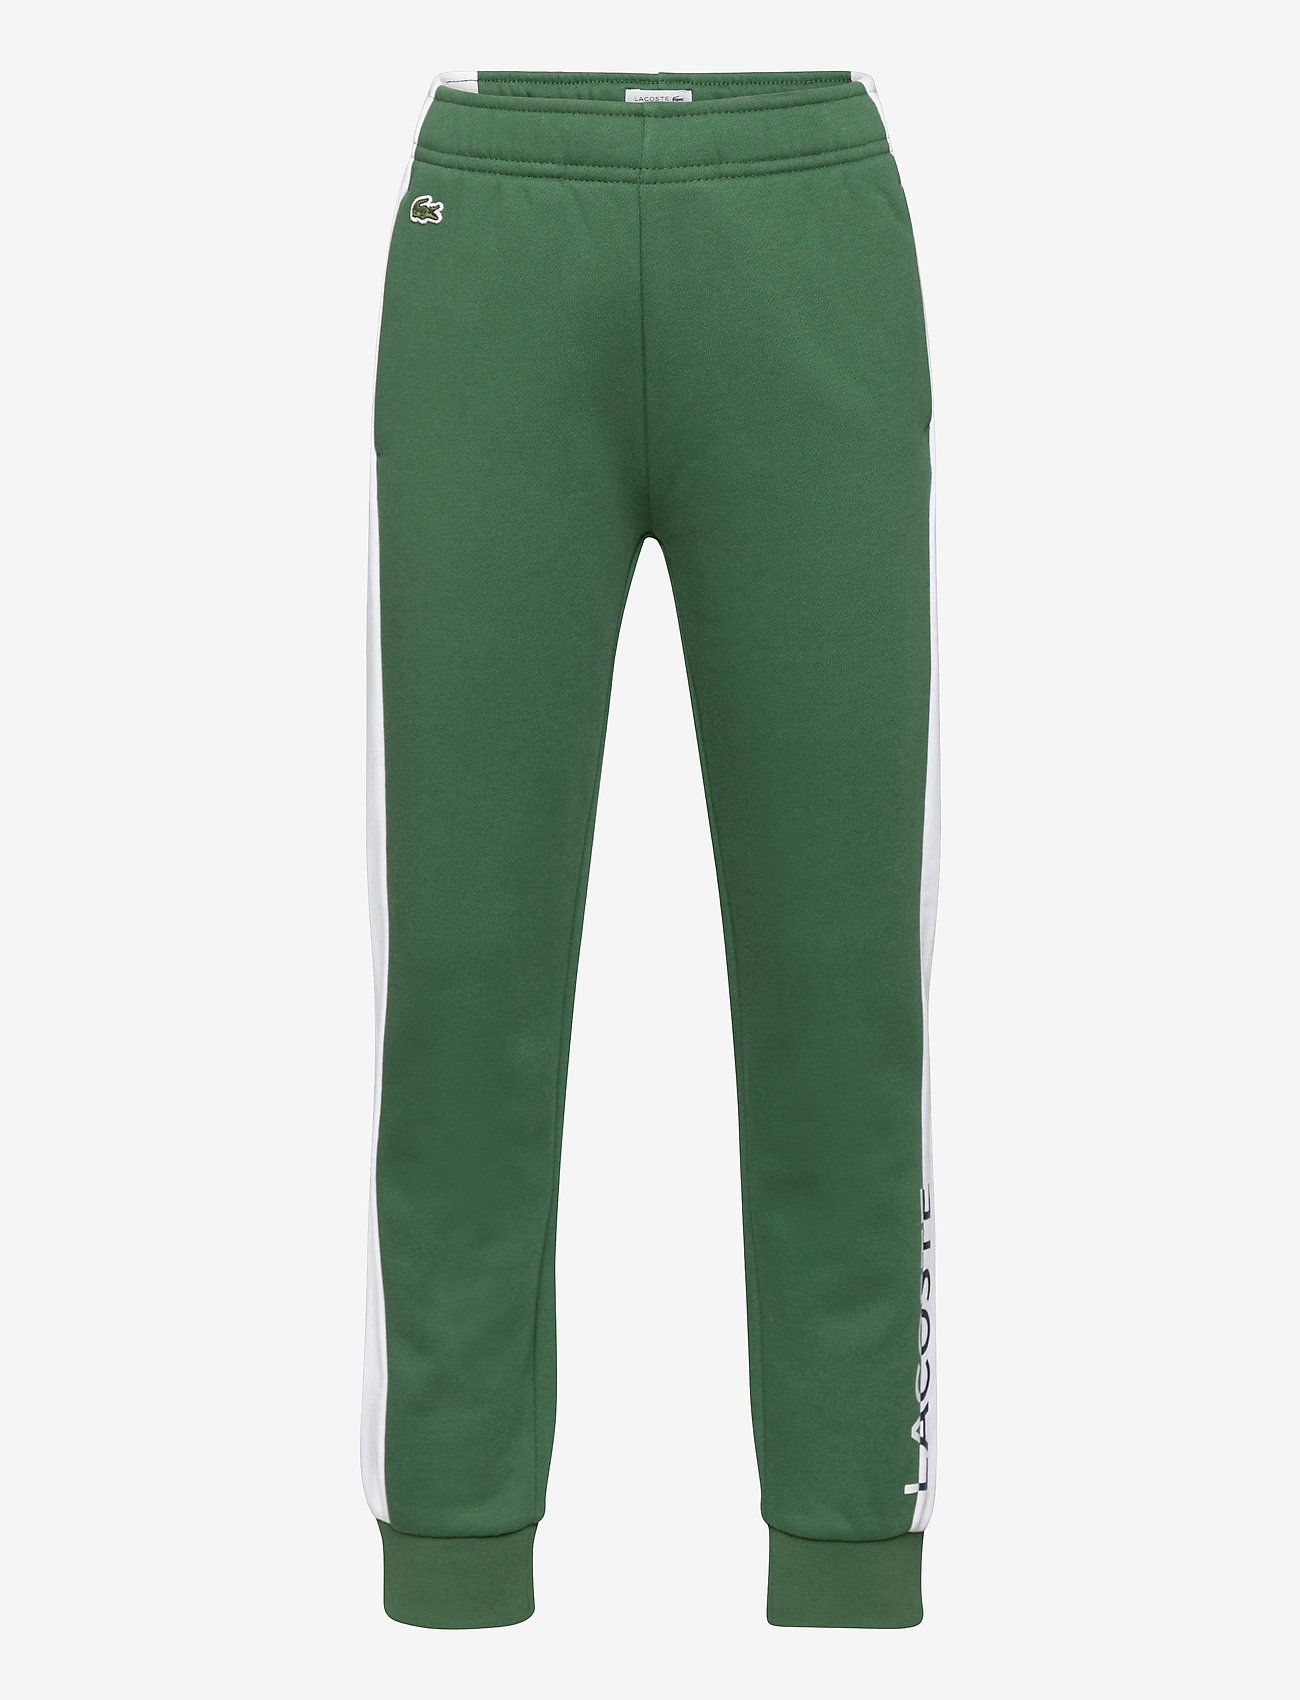 green lacoste bottoms